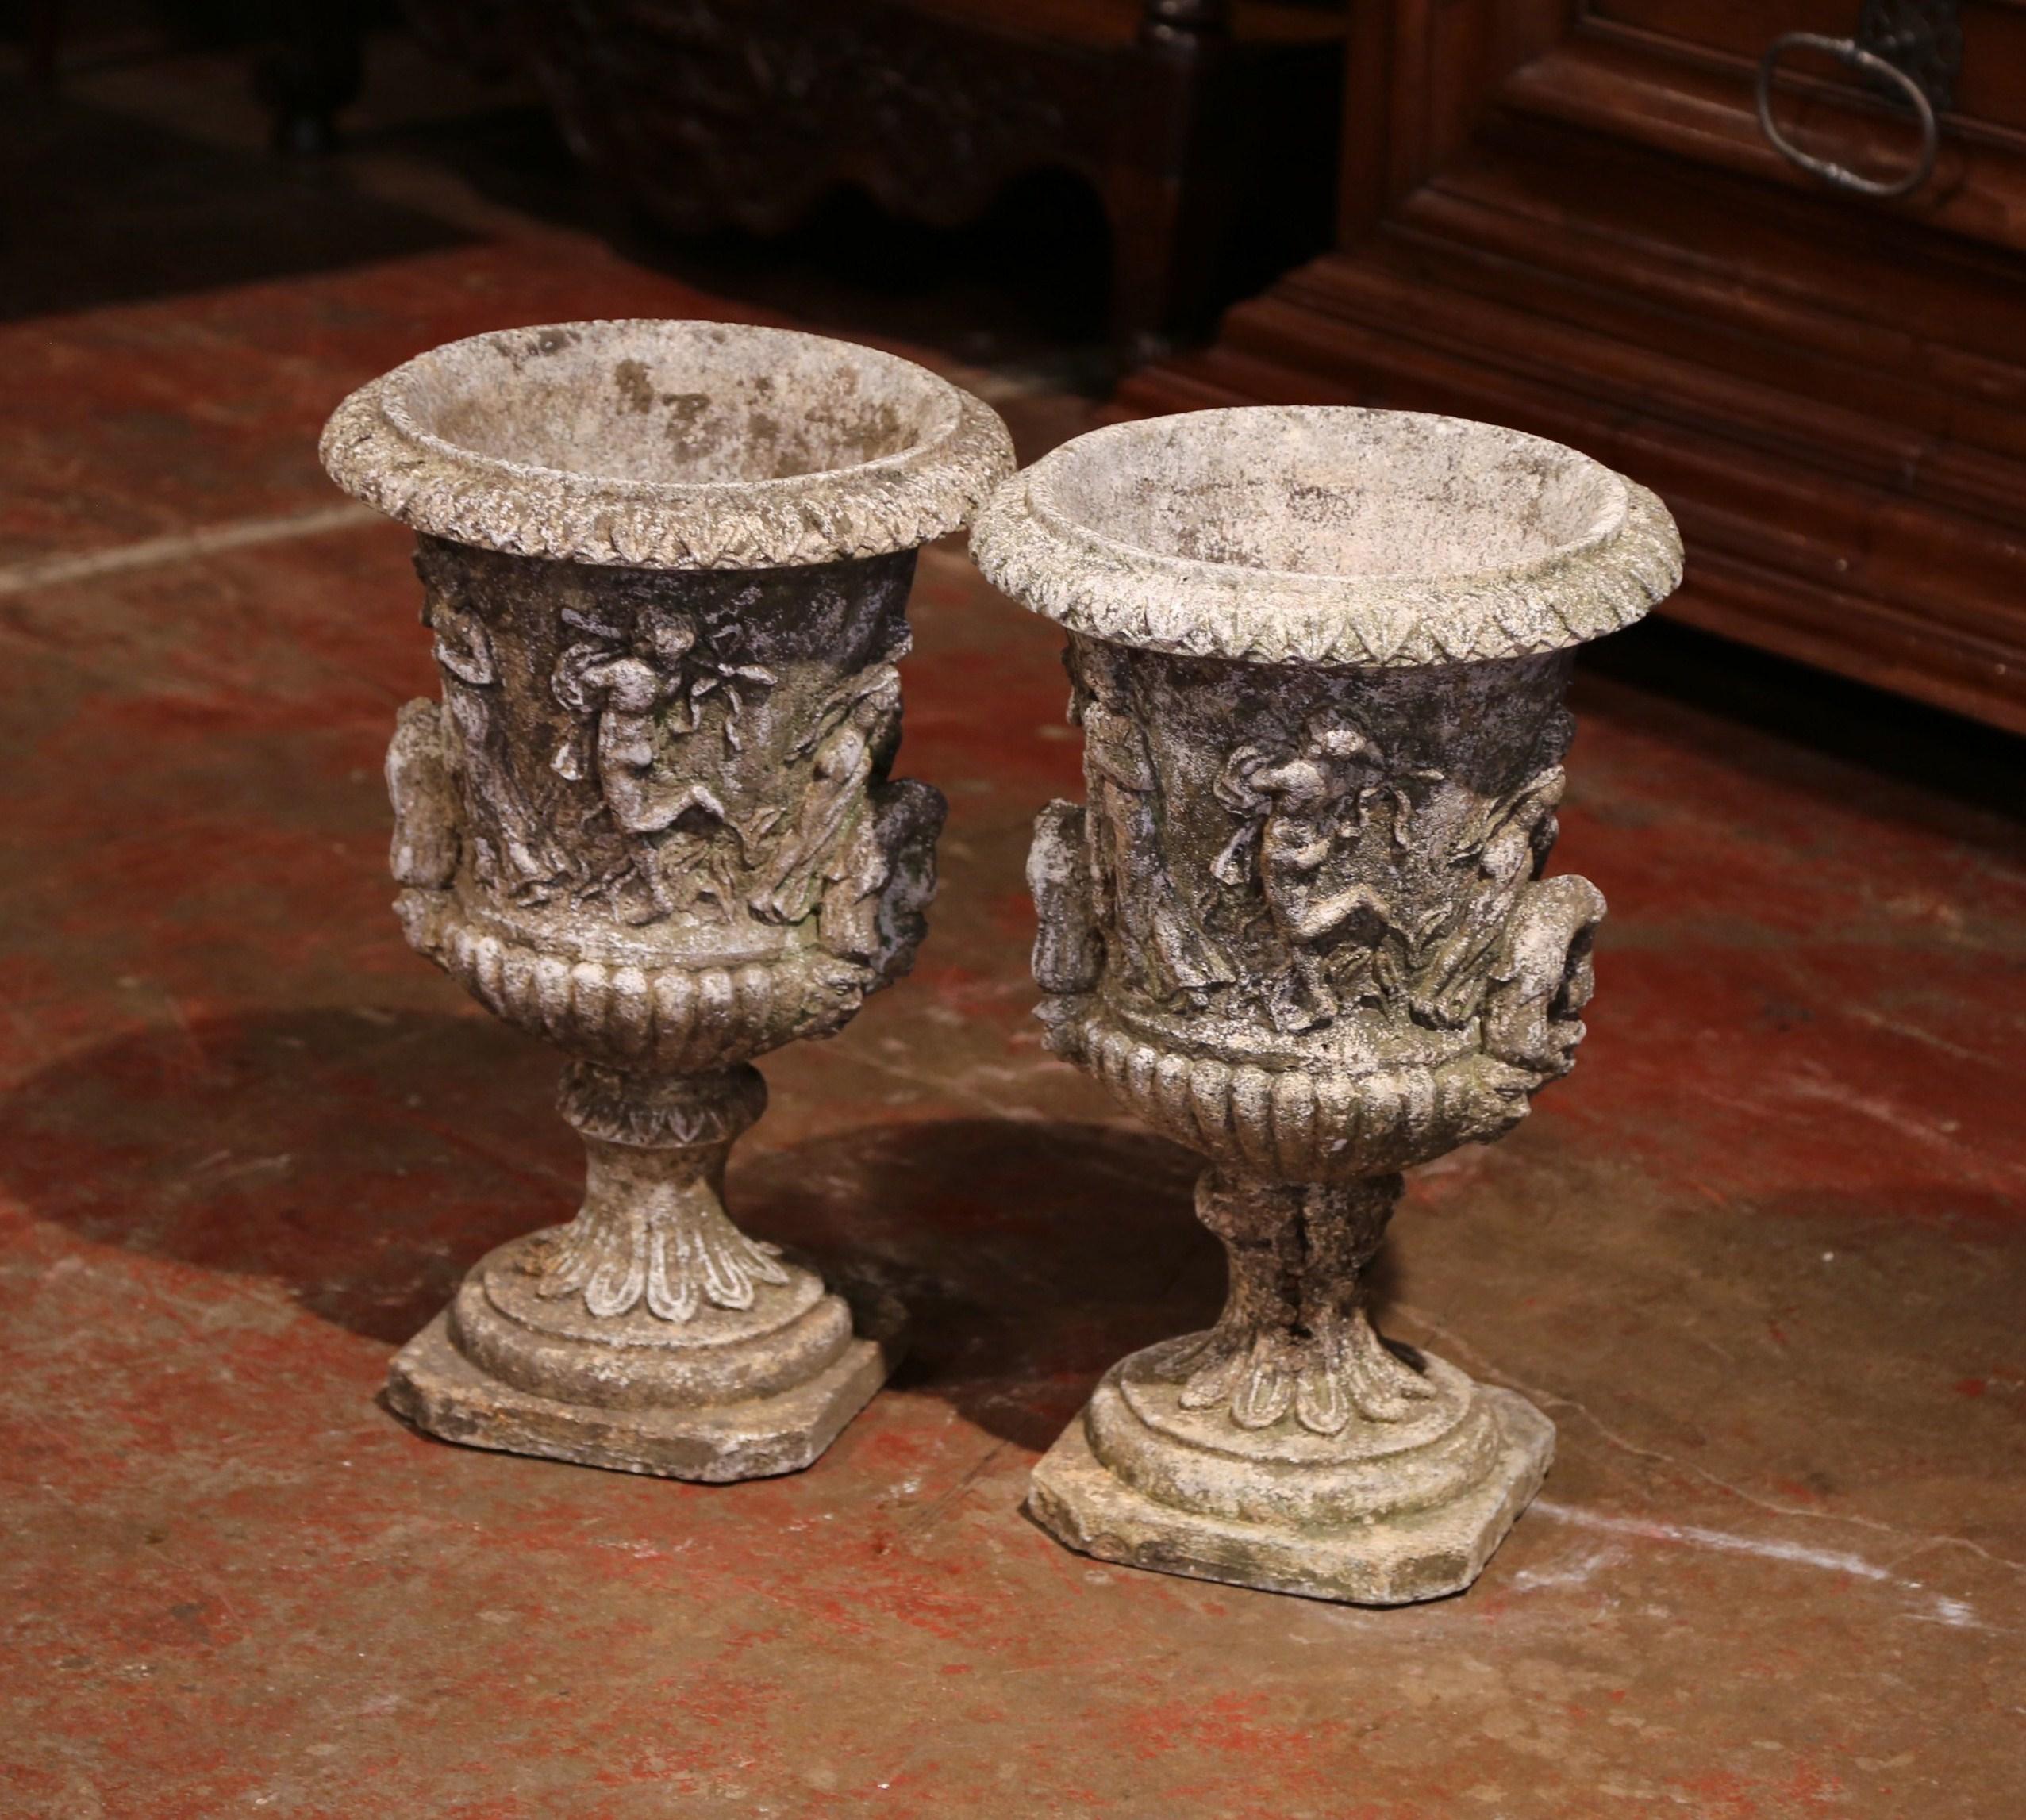 Decorate your porch or other outdoor sitting area with this pair of antique Medicis vases. Found in southern France and crafted circa 1920, the outdoor stone planters have side handles and feature delicate, allegoric scene carvings. The highly